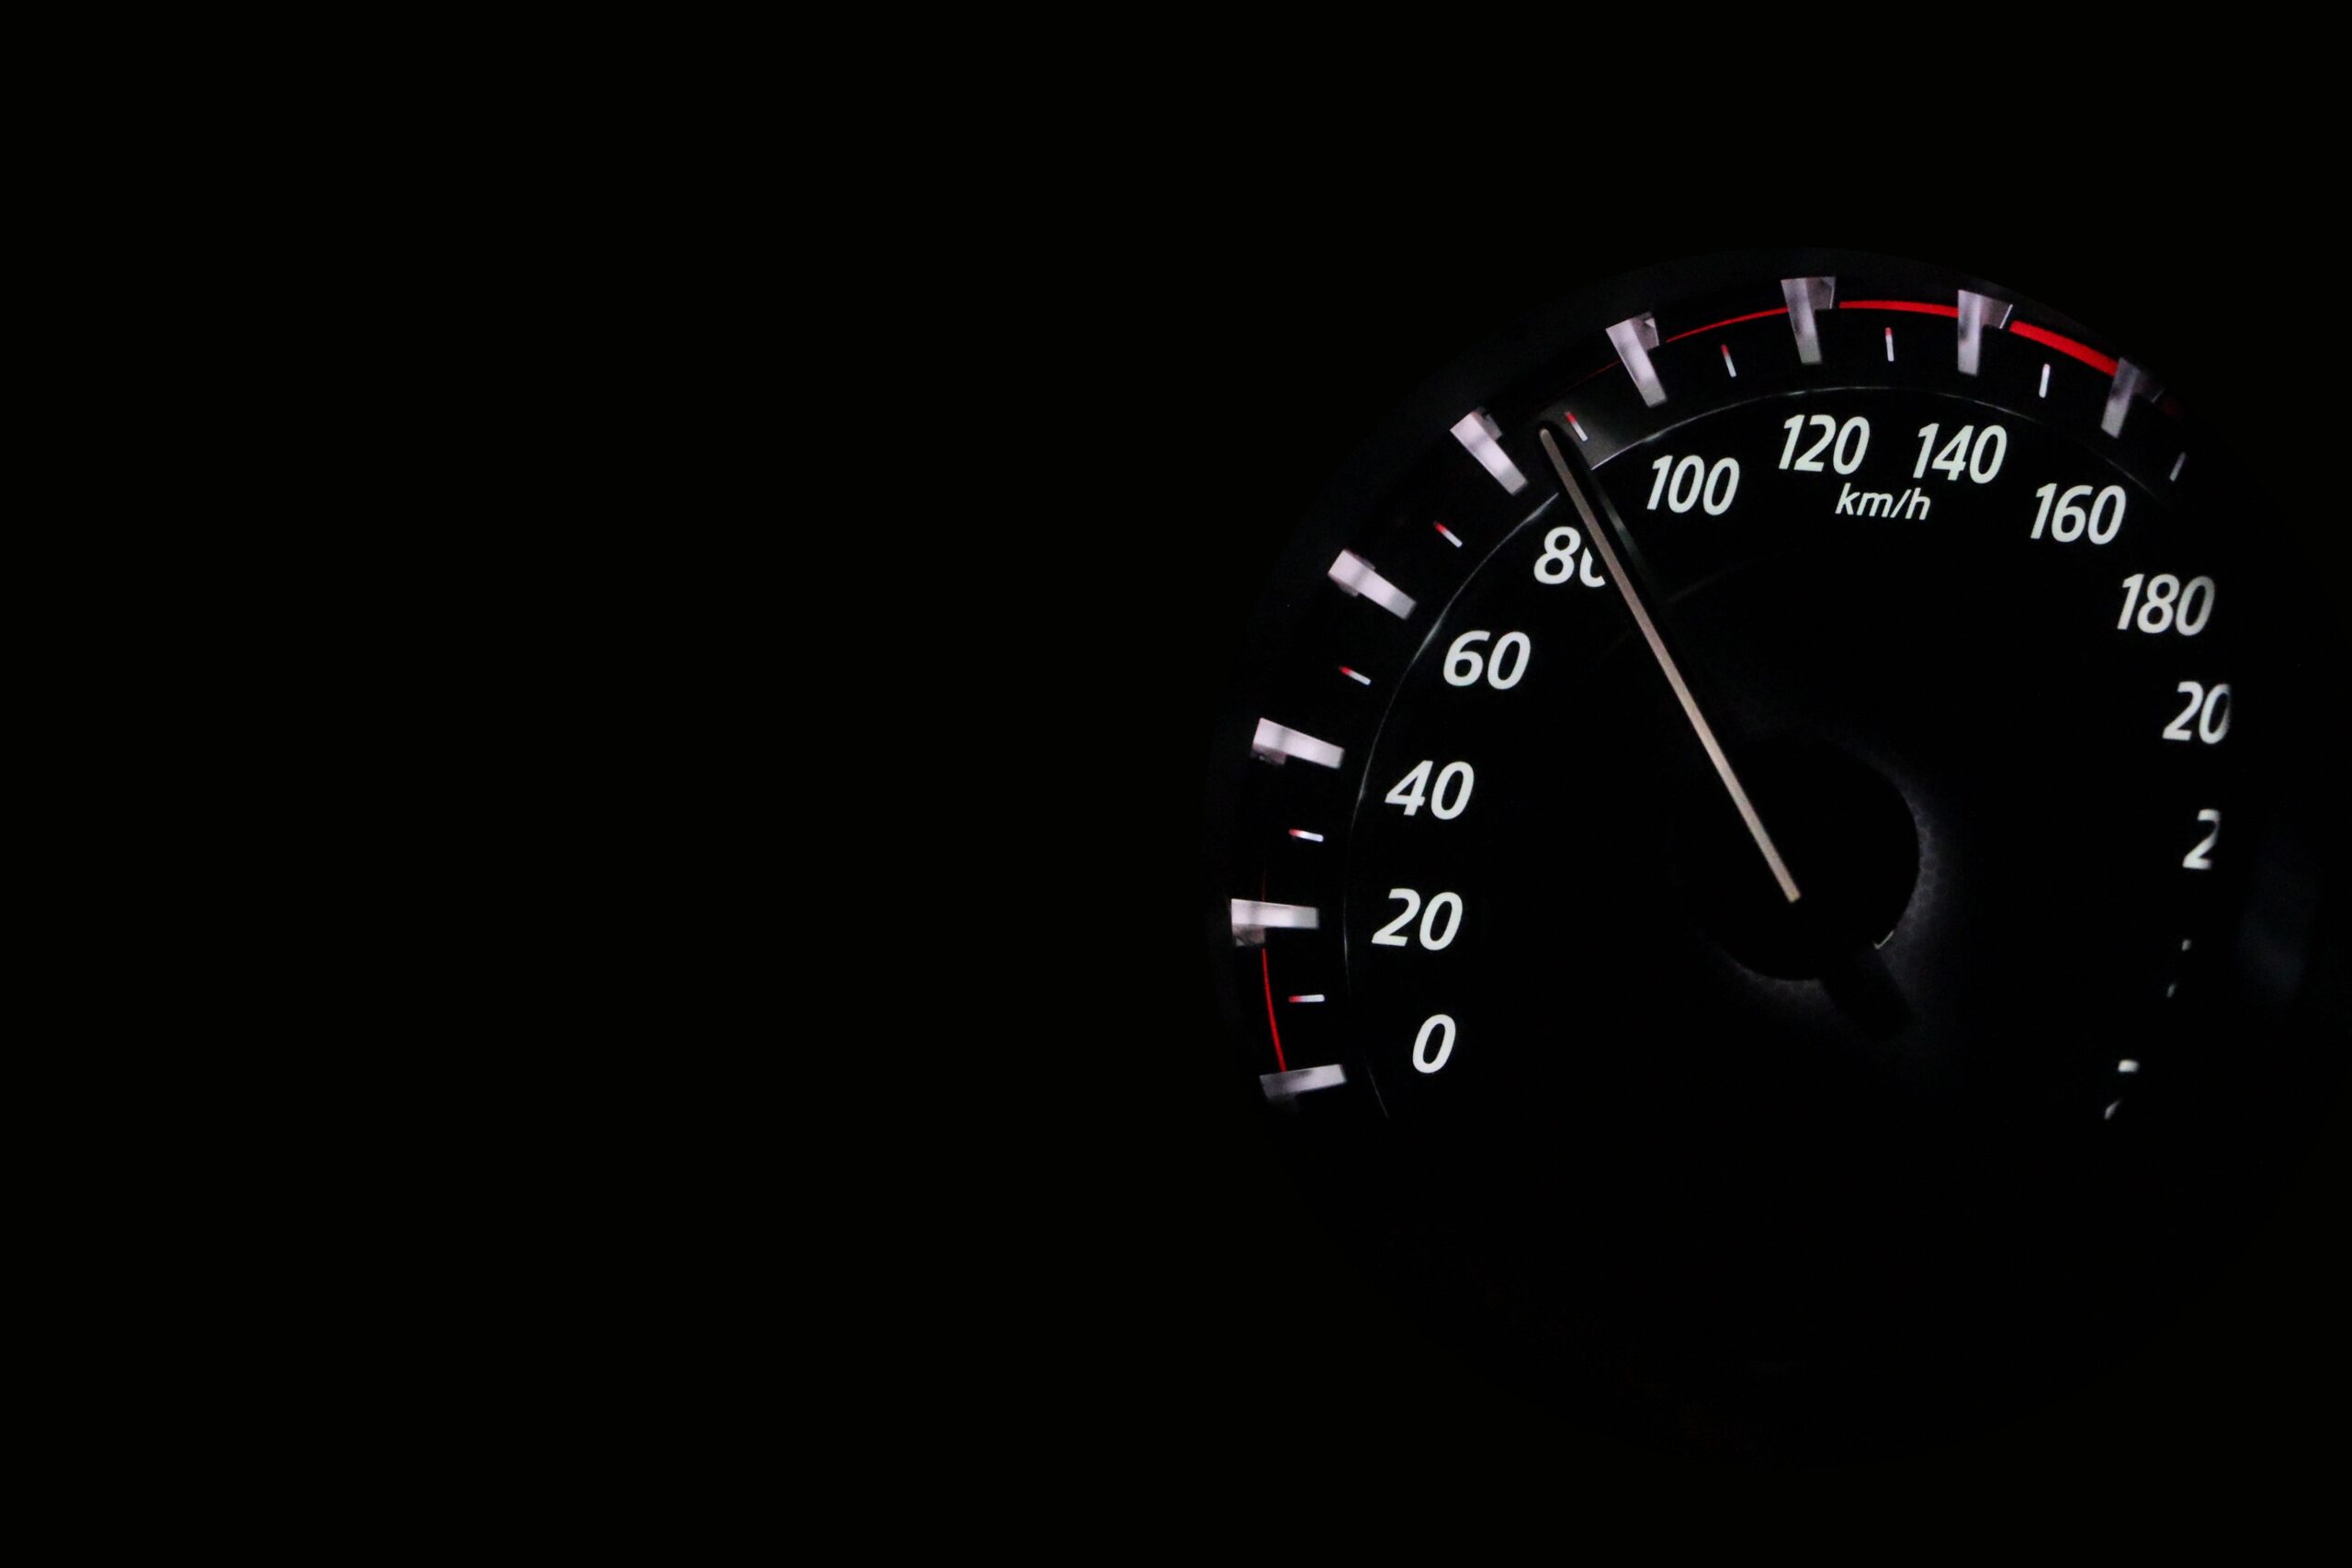 What To Do If You Get an Over 30 MPH Speeding Ticket